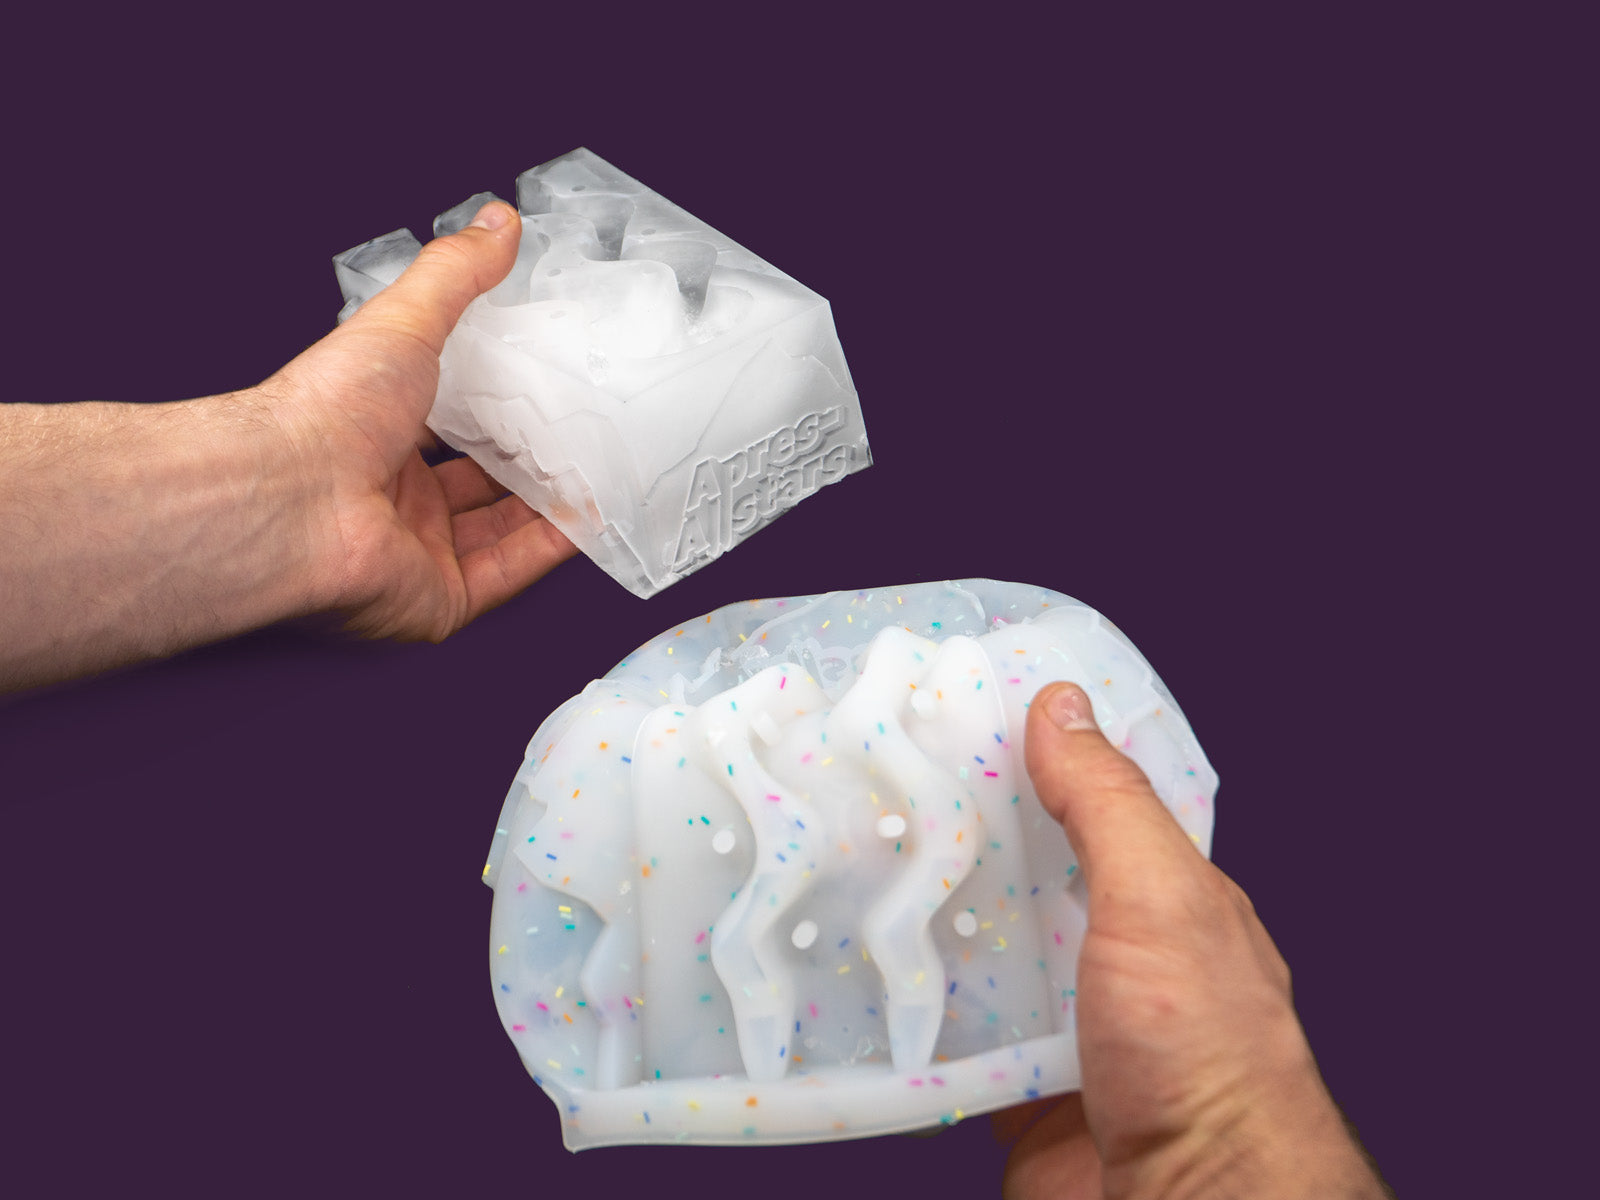 Photo of a white speckled plastic mould has been separated from the frozen water inside. 1 hand is holding the mold, the other the ice.The image is set against a purple backdrop, viewed from the back.